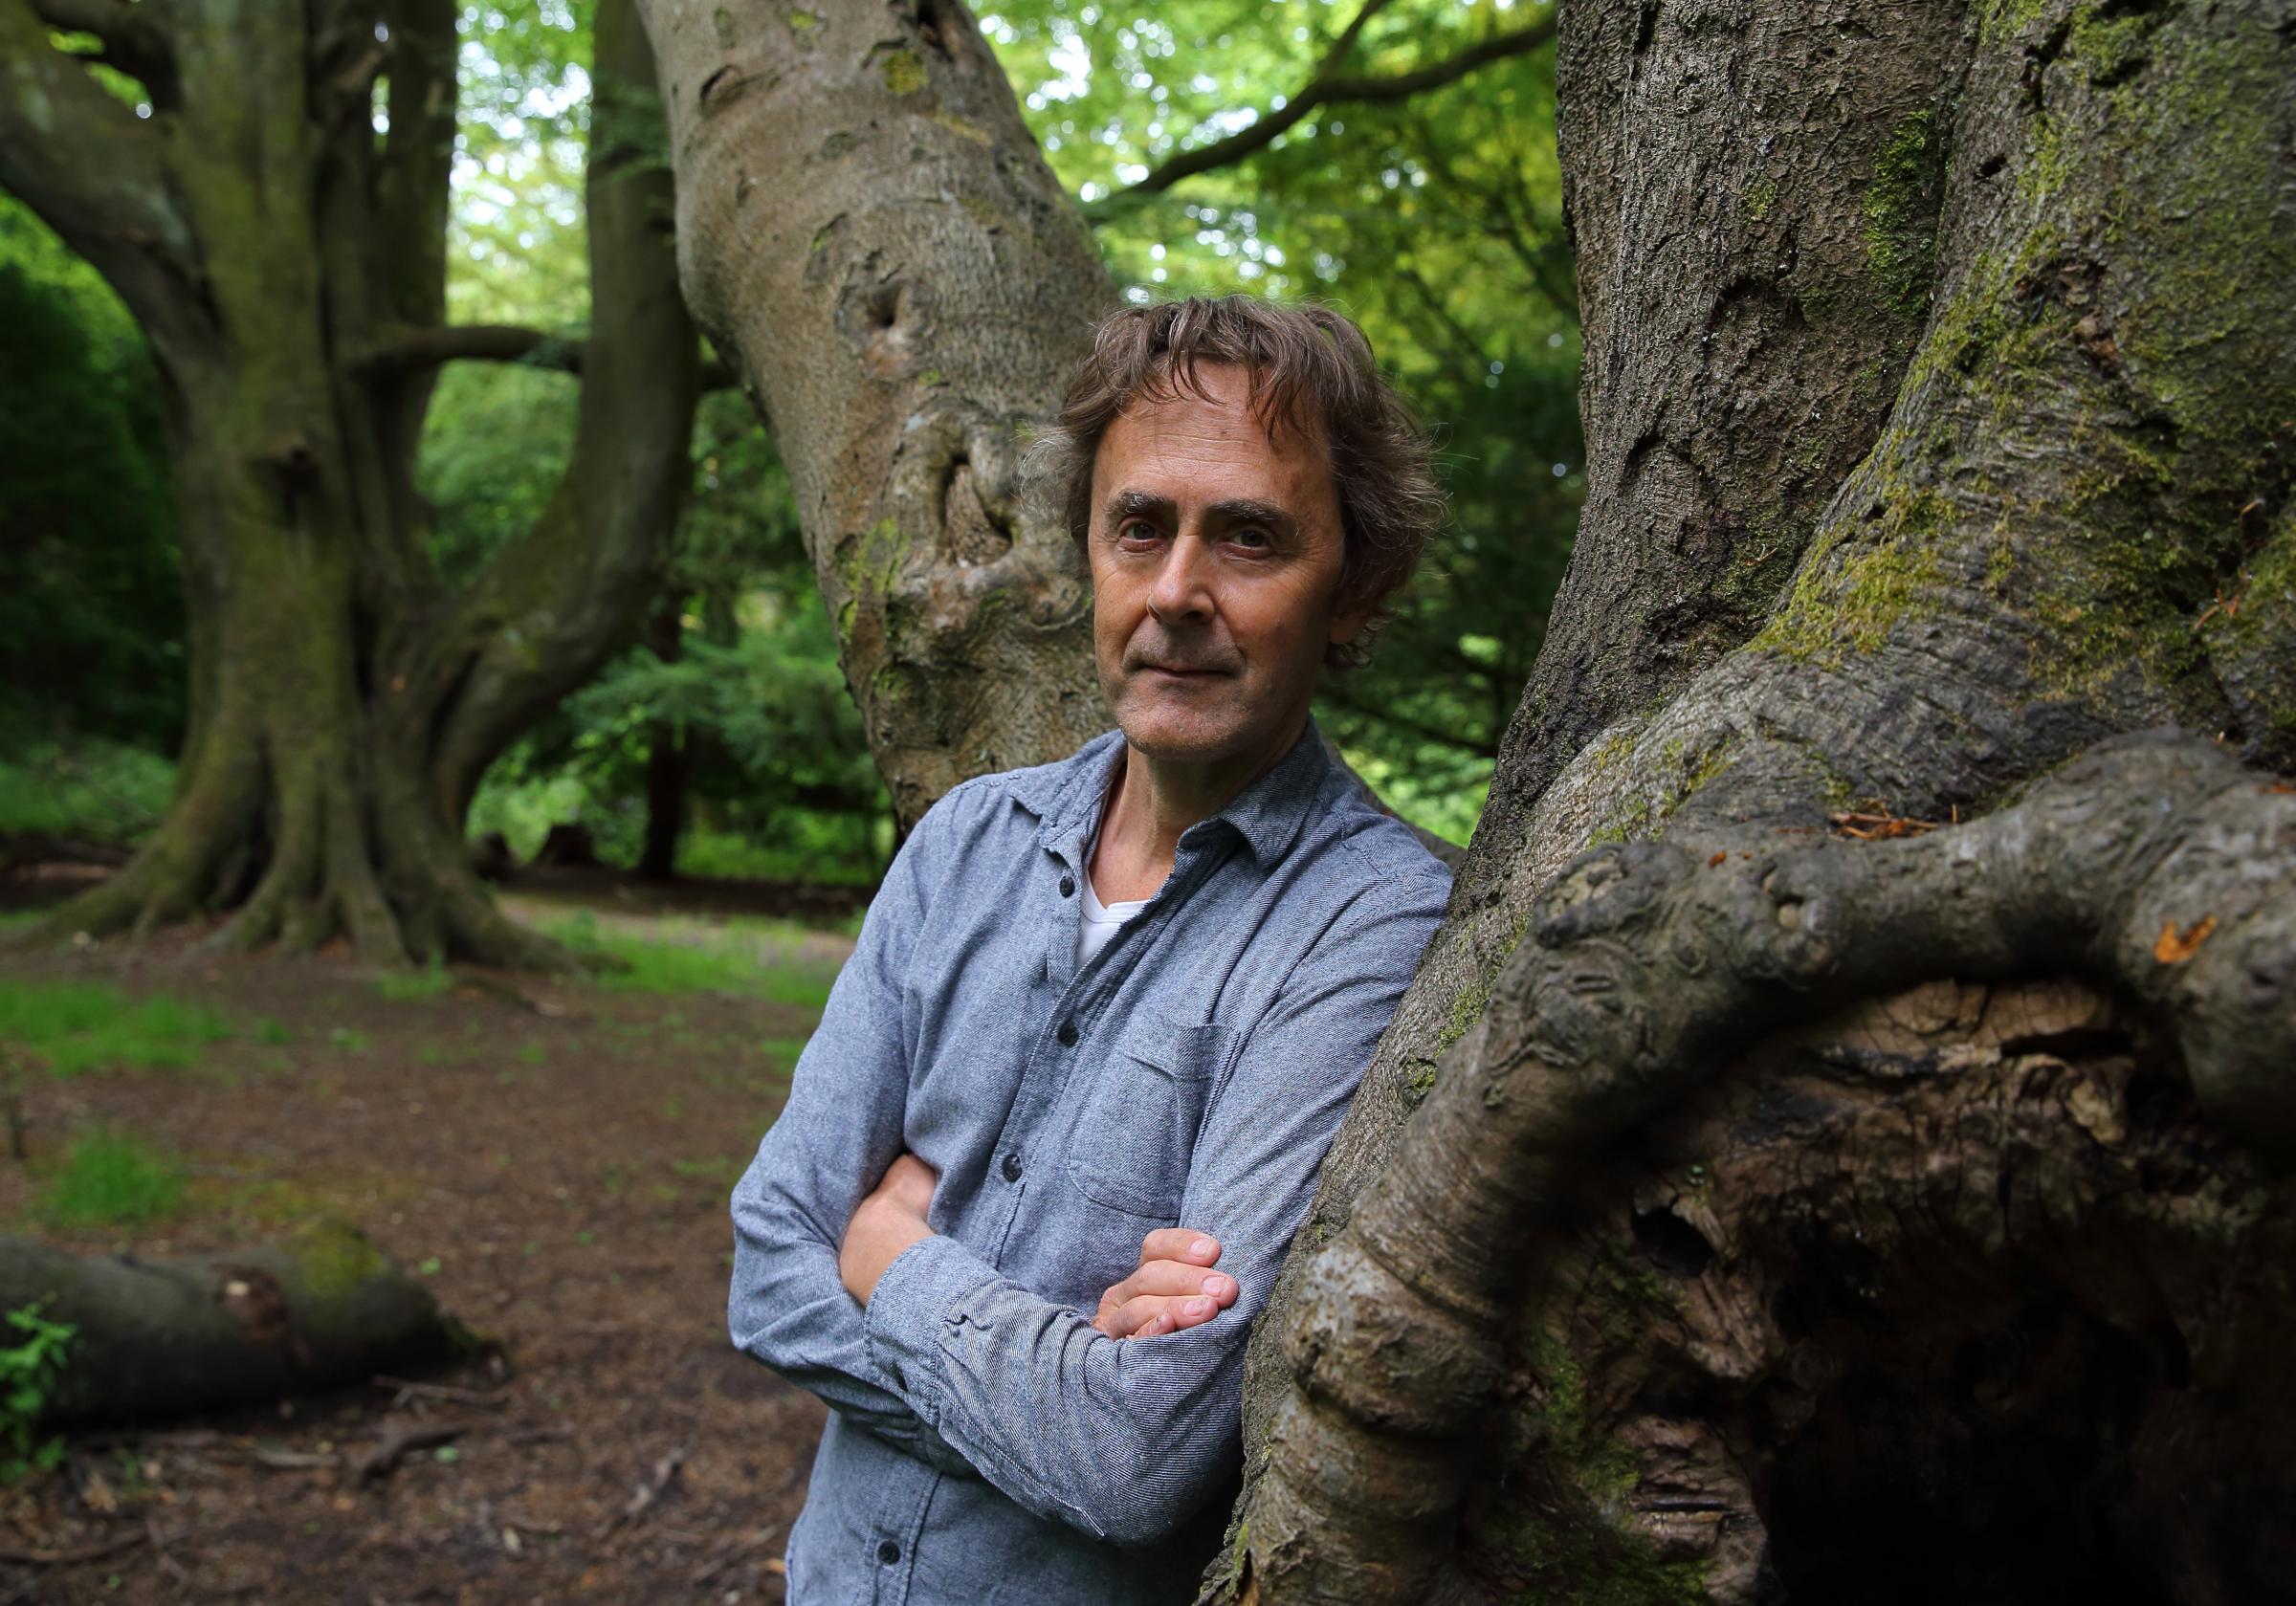 Herald Covid memorial artist Alec Finlay pictured in Pollok Country Park. Photograph by Colin Mearns